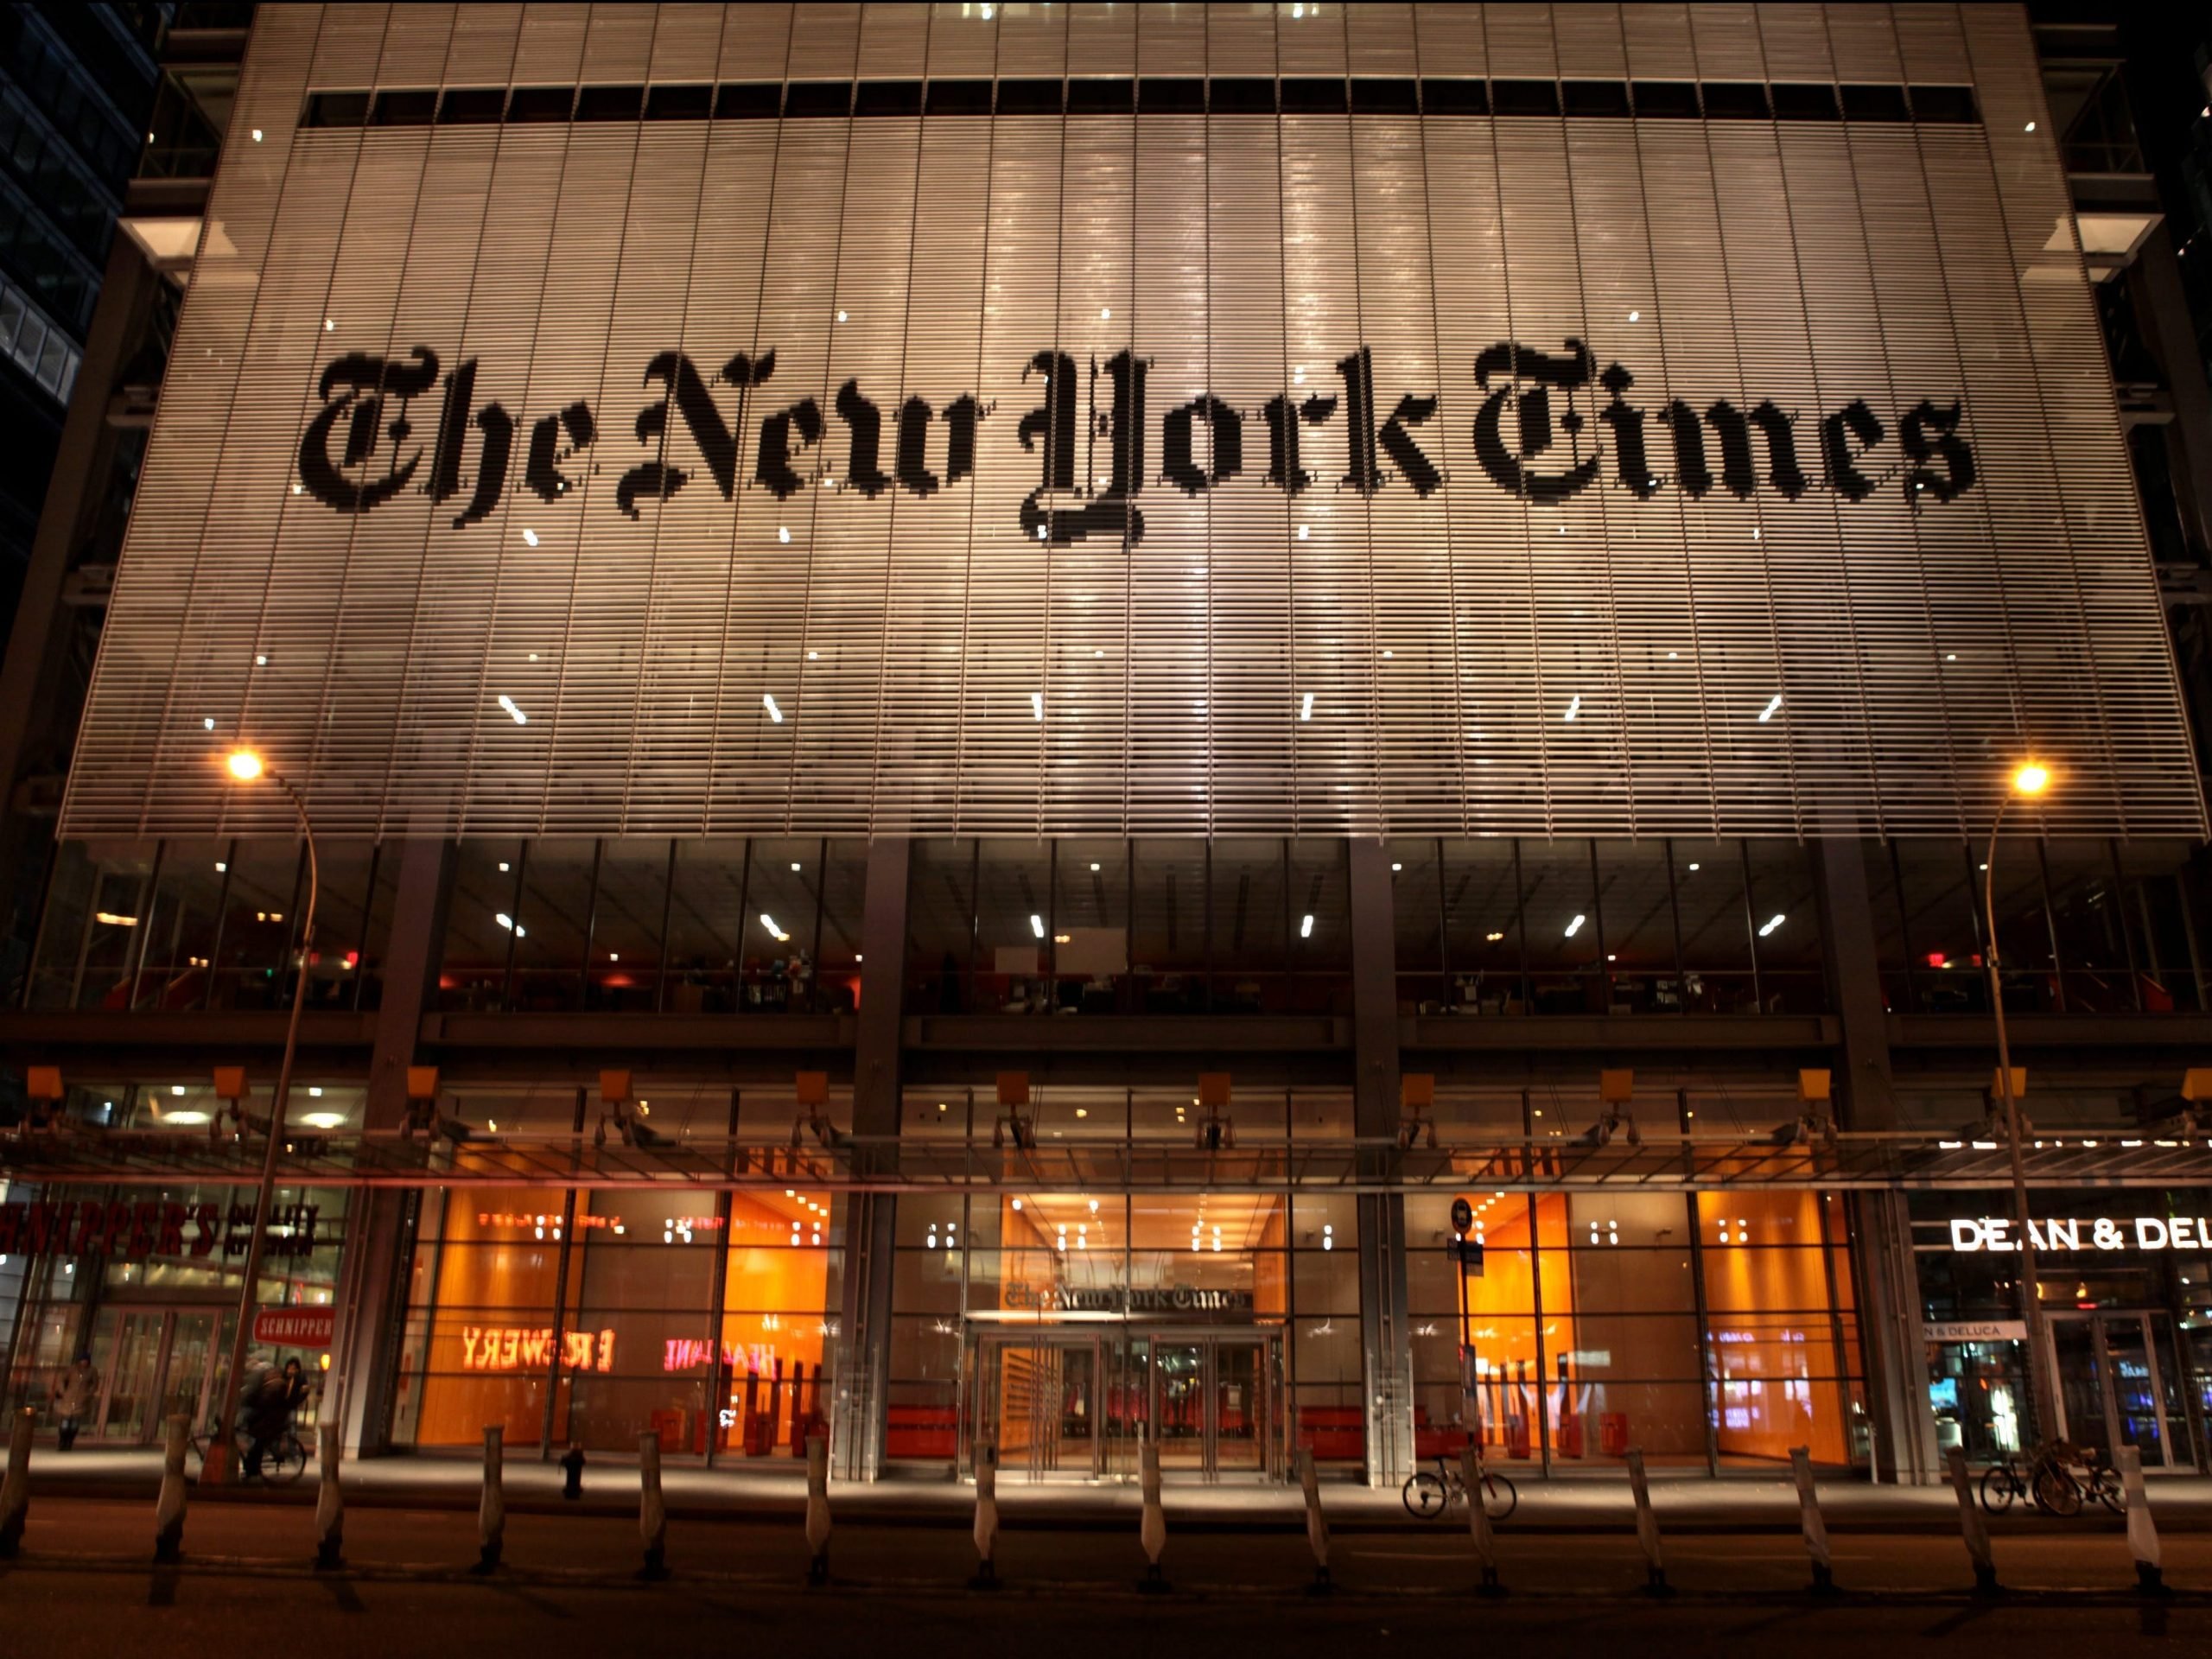 Nighttime view of the New York Times Building